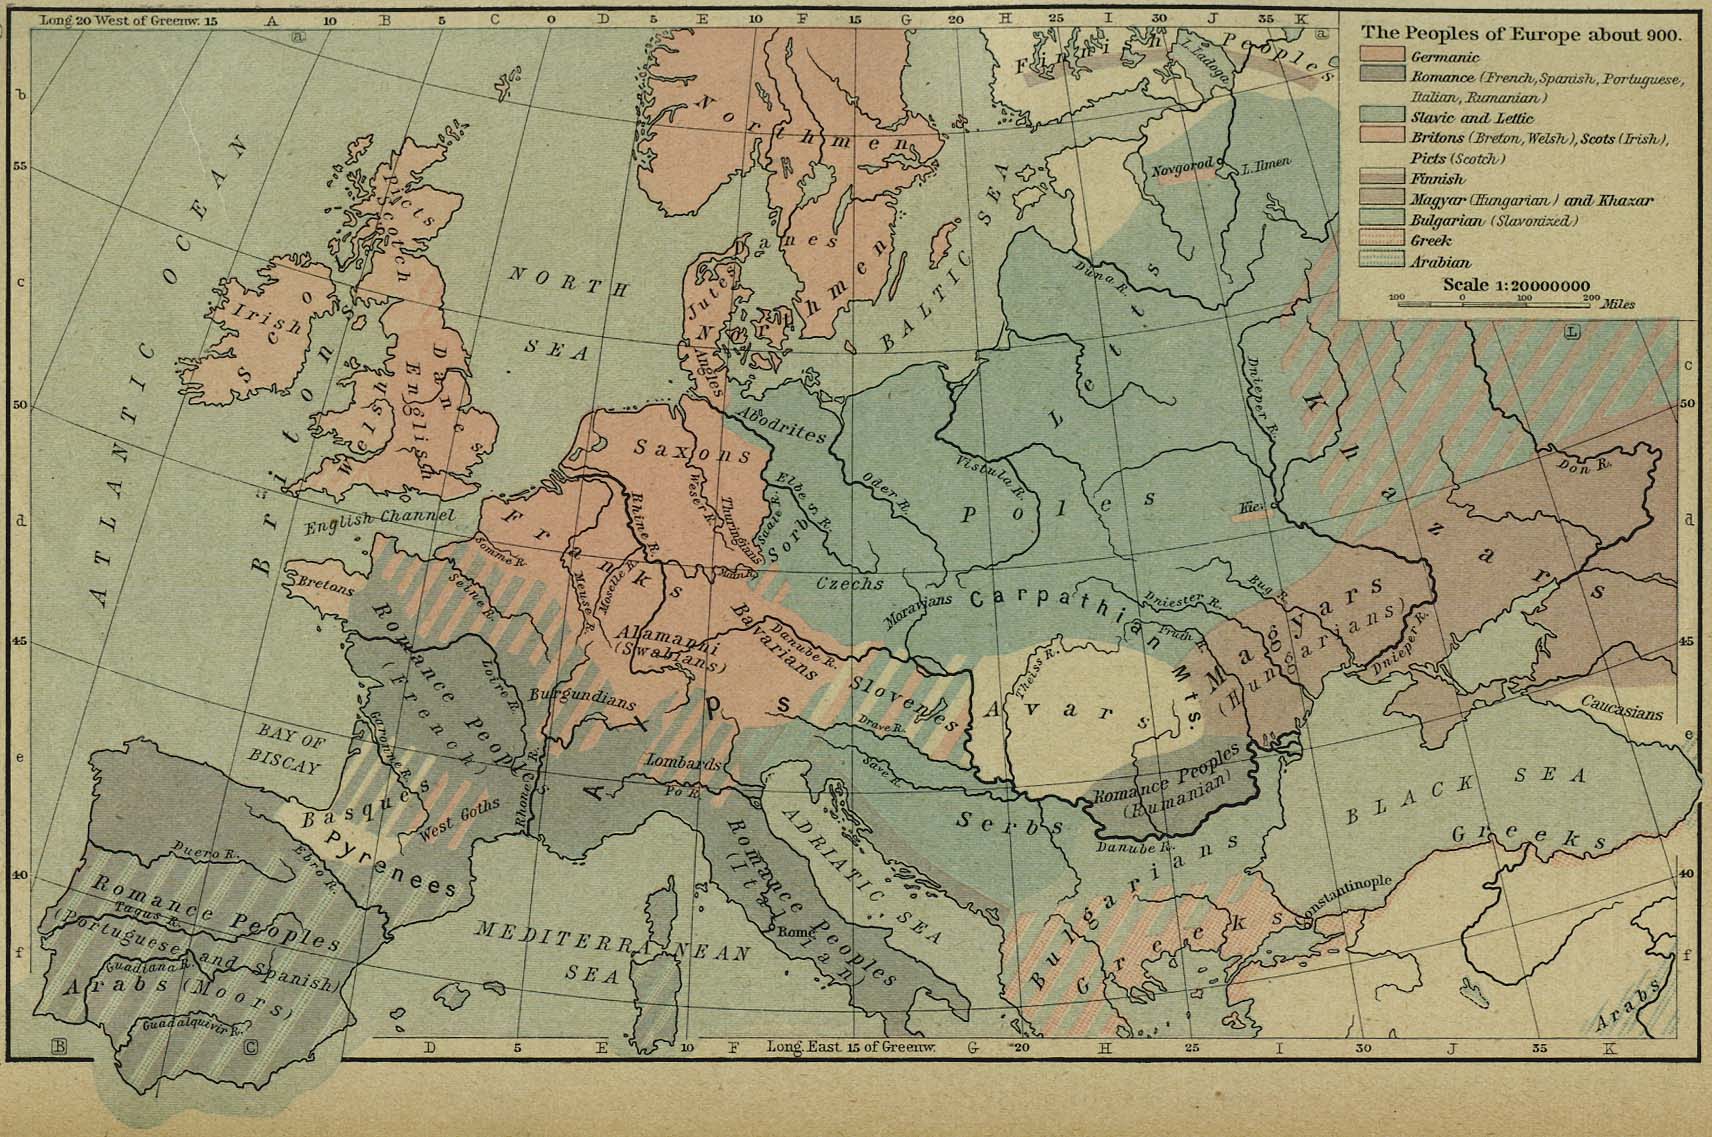 The Peoples of Europe about 900